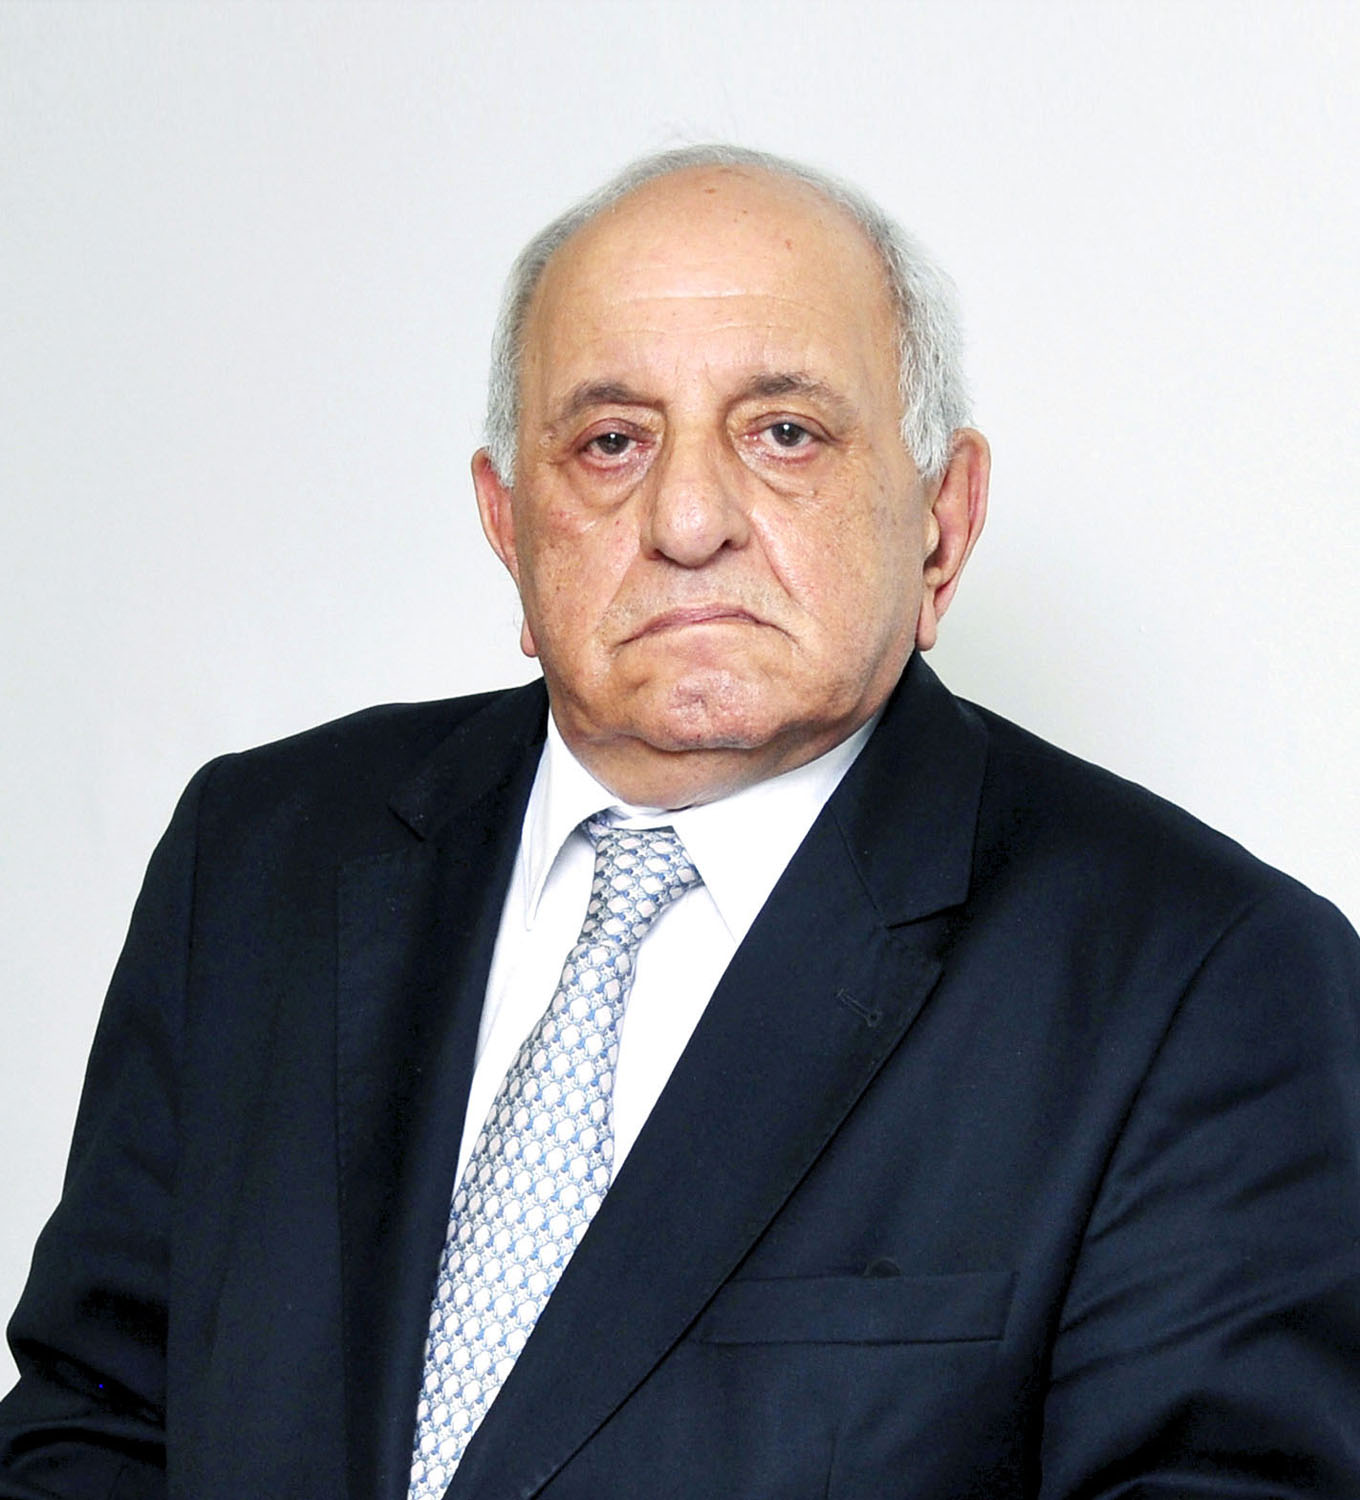 Dr.-Michel-Alaby-Secretary-General-and-CEO-of-the-Arab-Brazilian-Chamber-of-Commerce.jpg